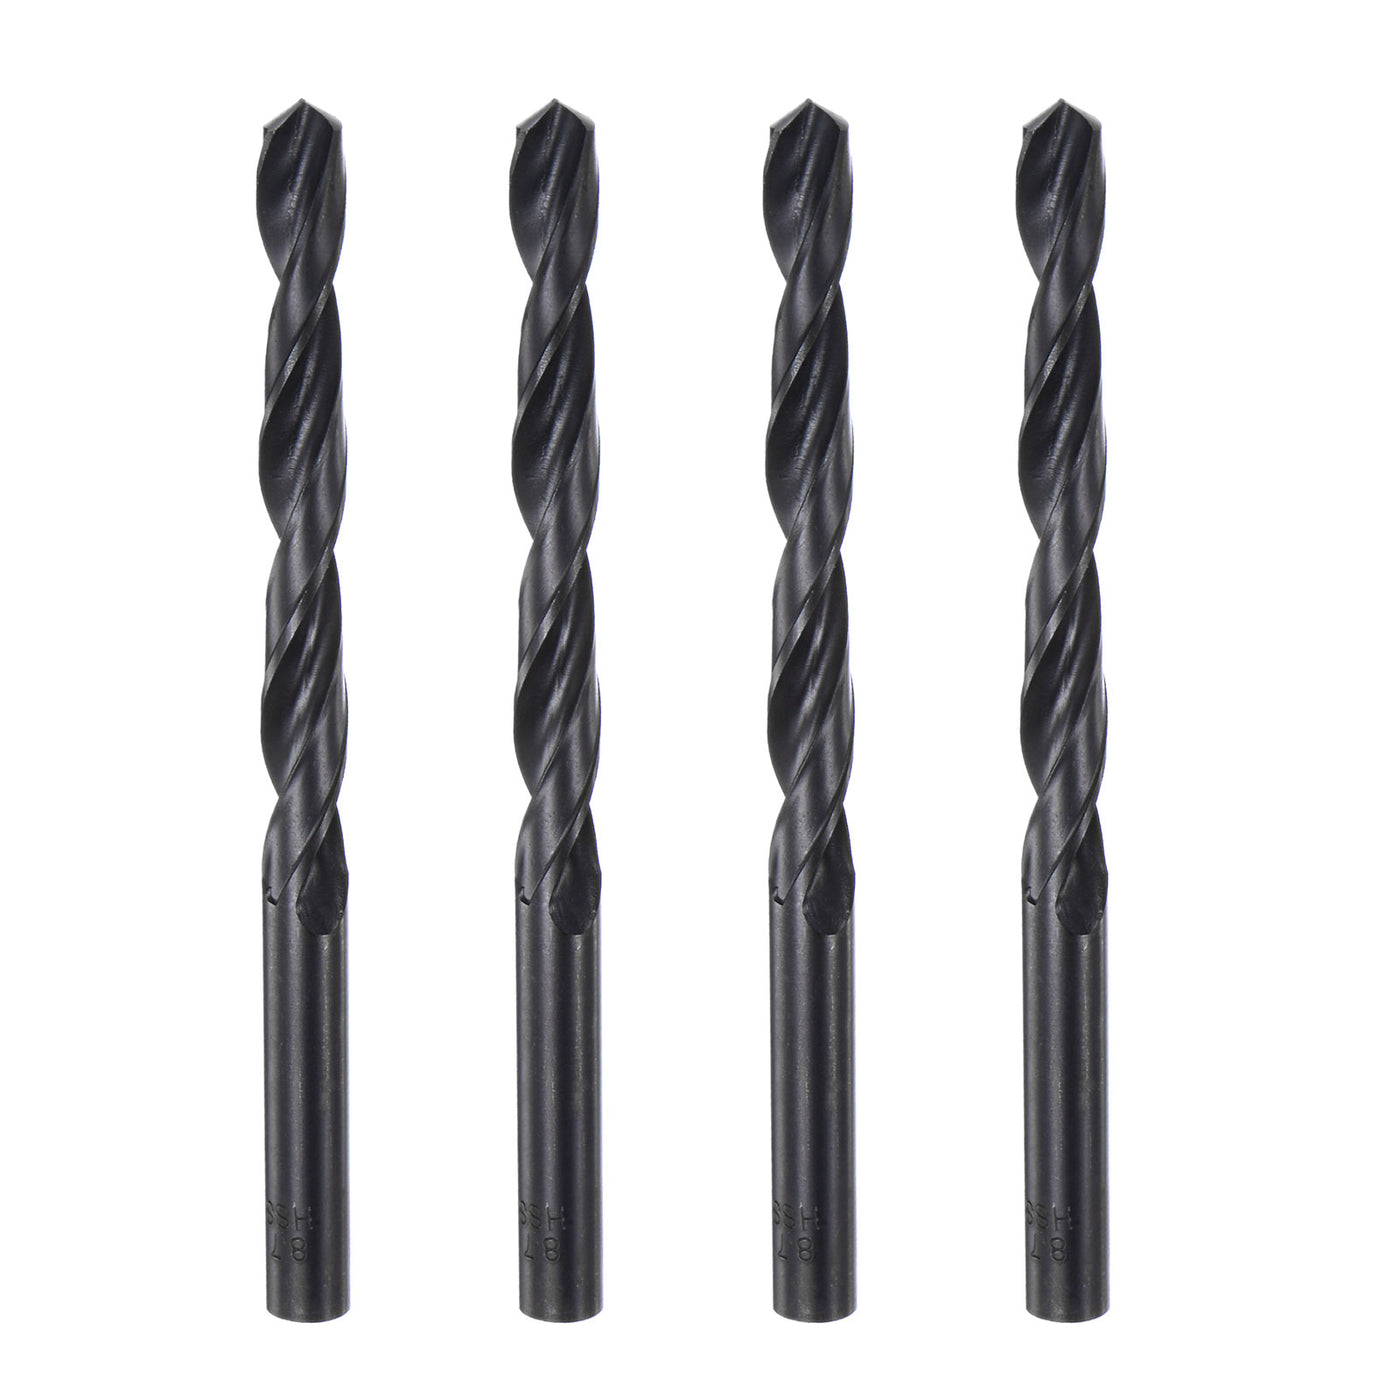 uxcell Uxcell High Speed Steel Twist Drill Bit, 8.7mm Fully Ground Black Oxide 123mm Long 4Pcs